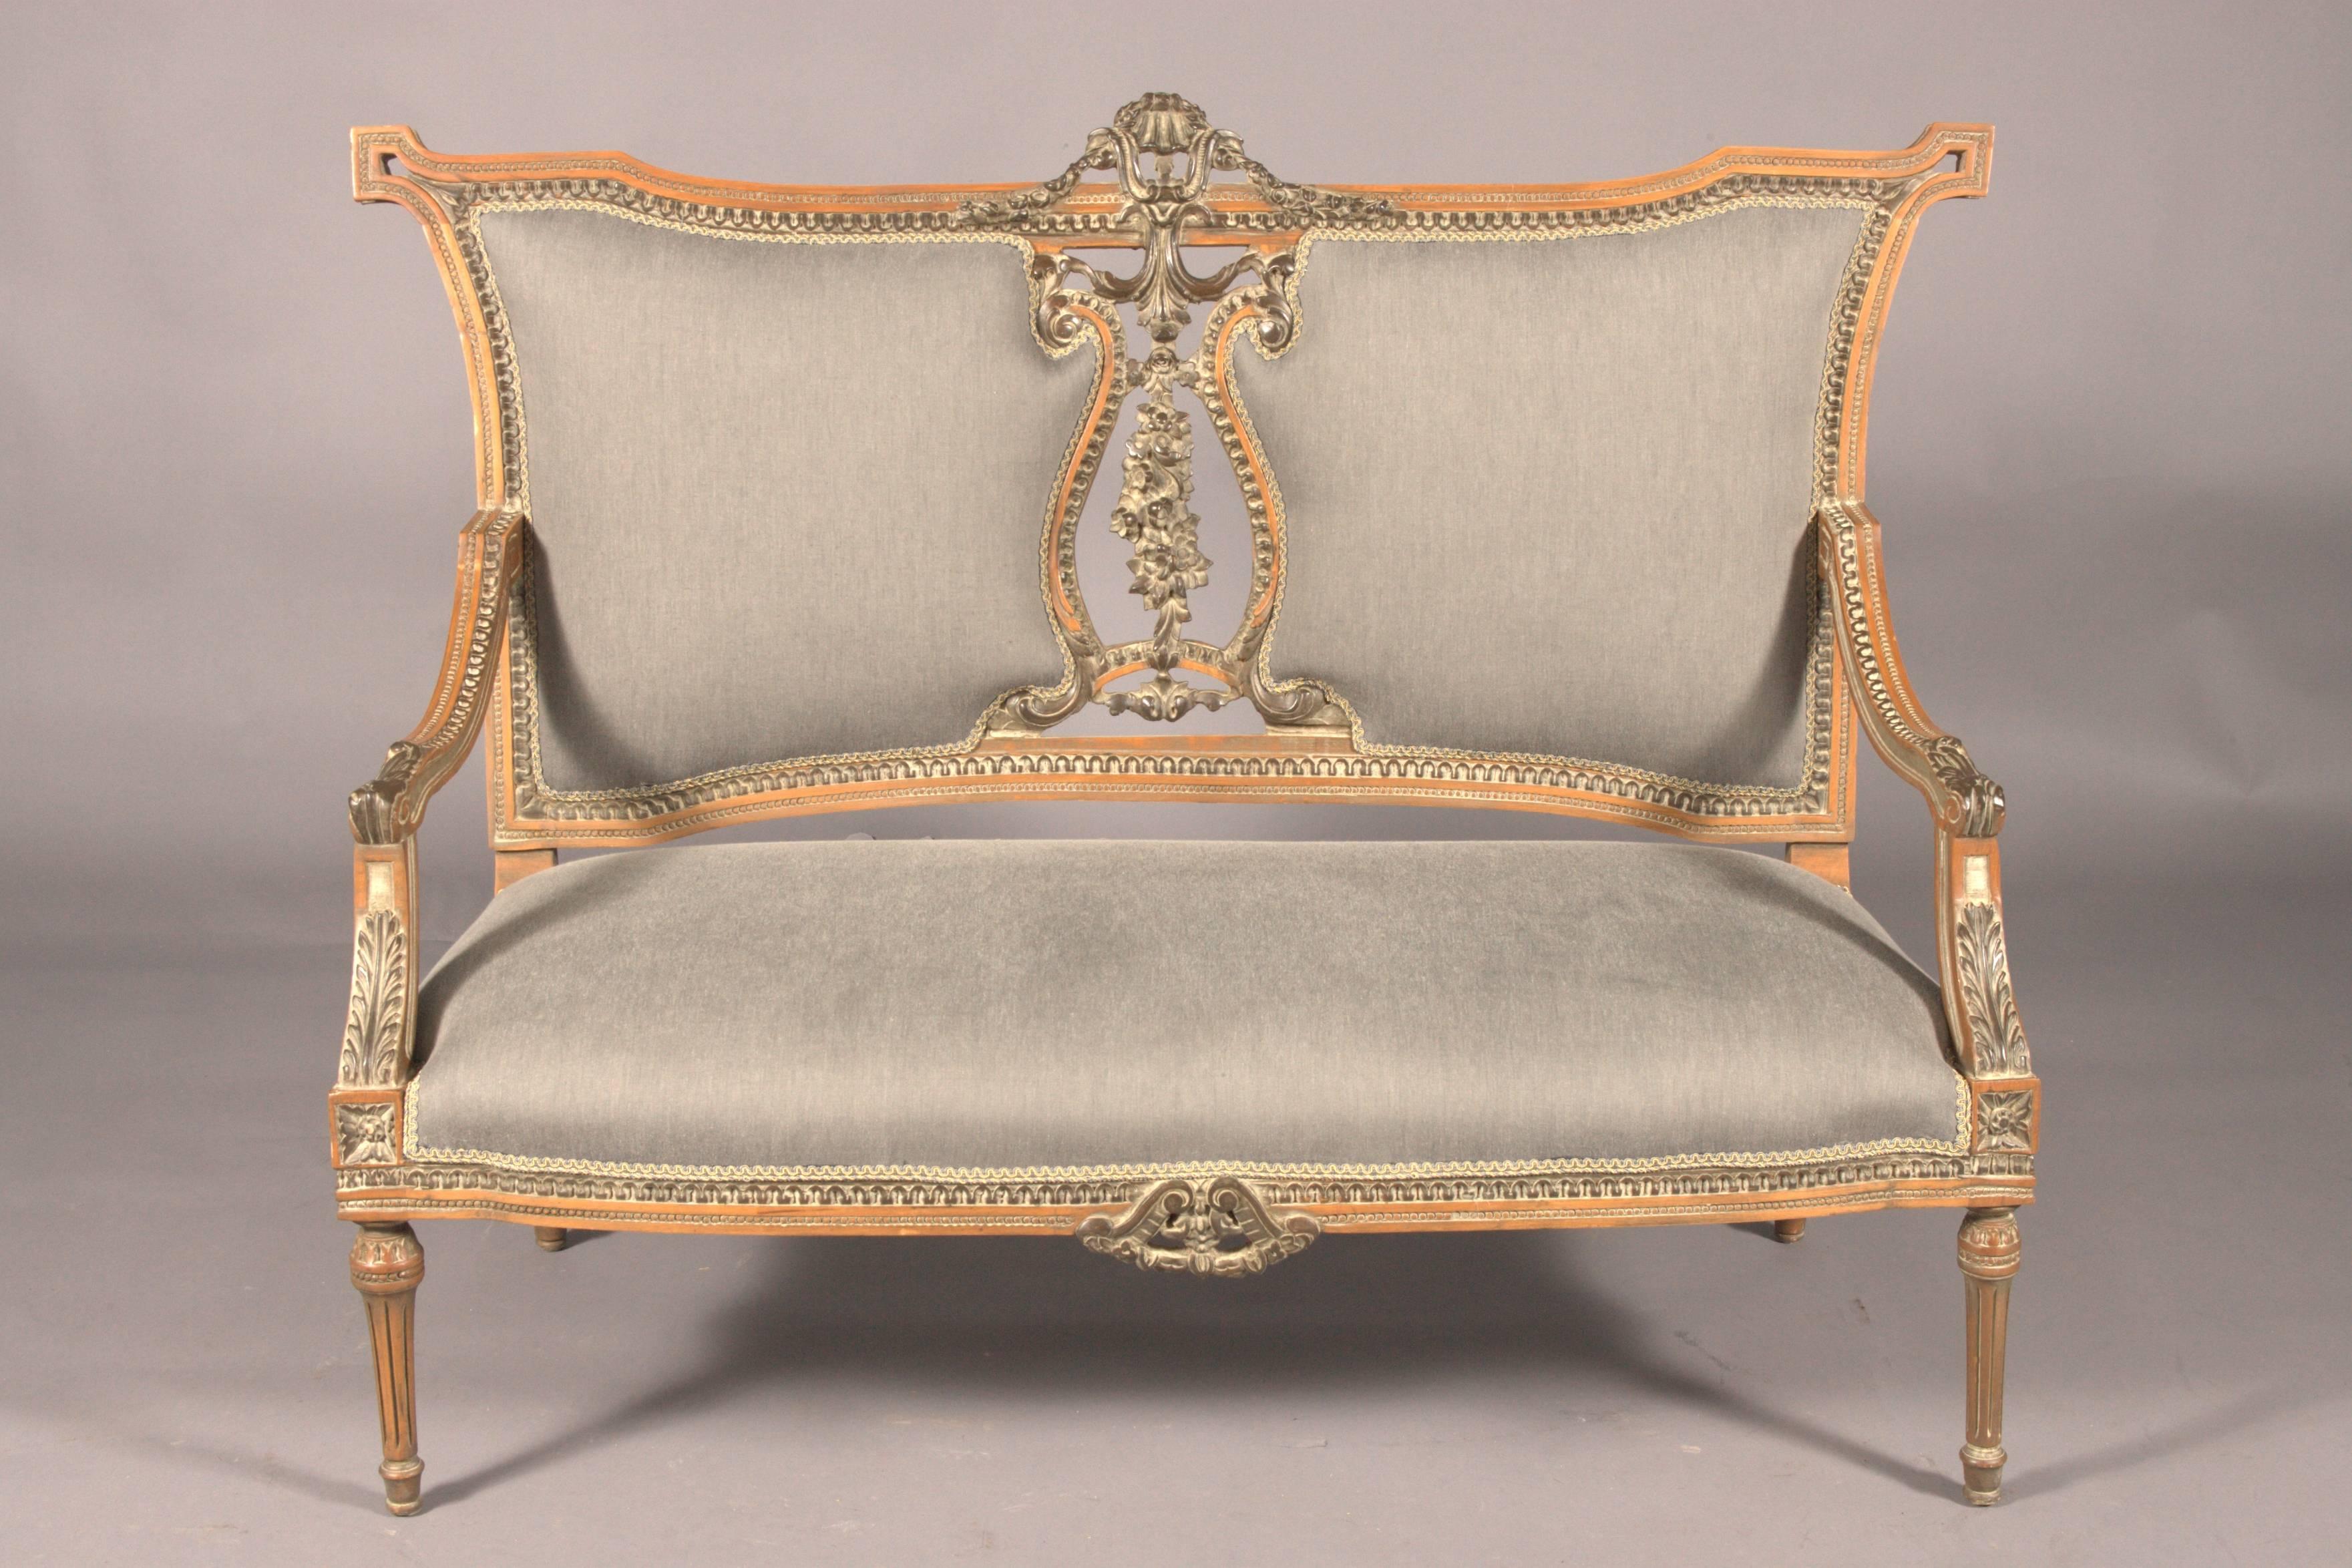 Hand-Carved 20th Century French Seating Group in the Louis Seize Style Beechwood